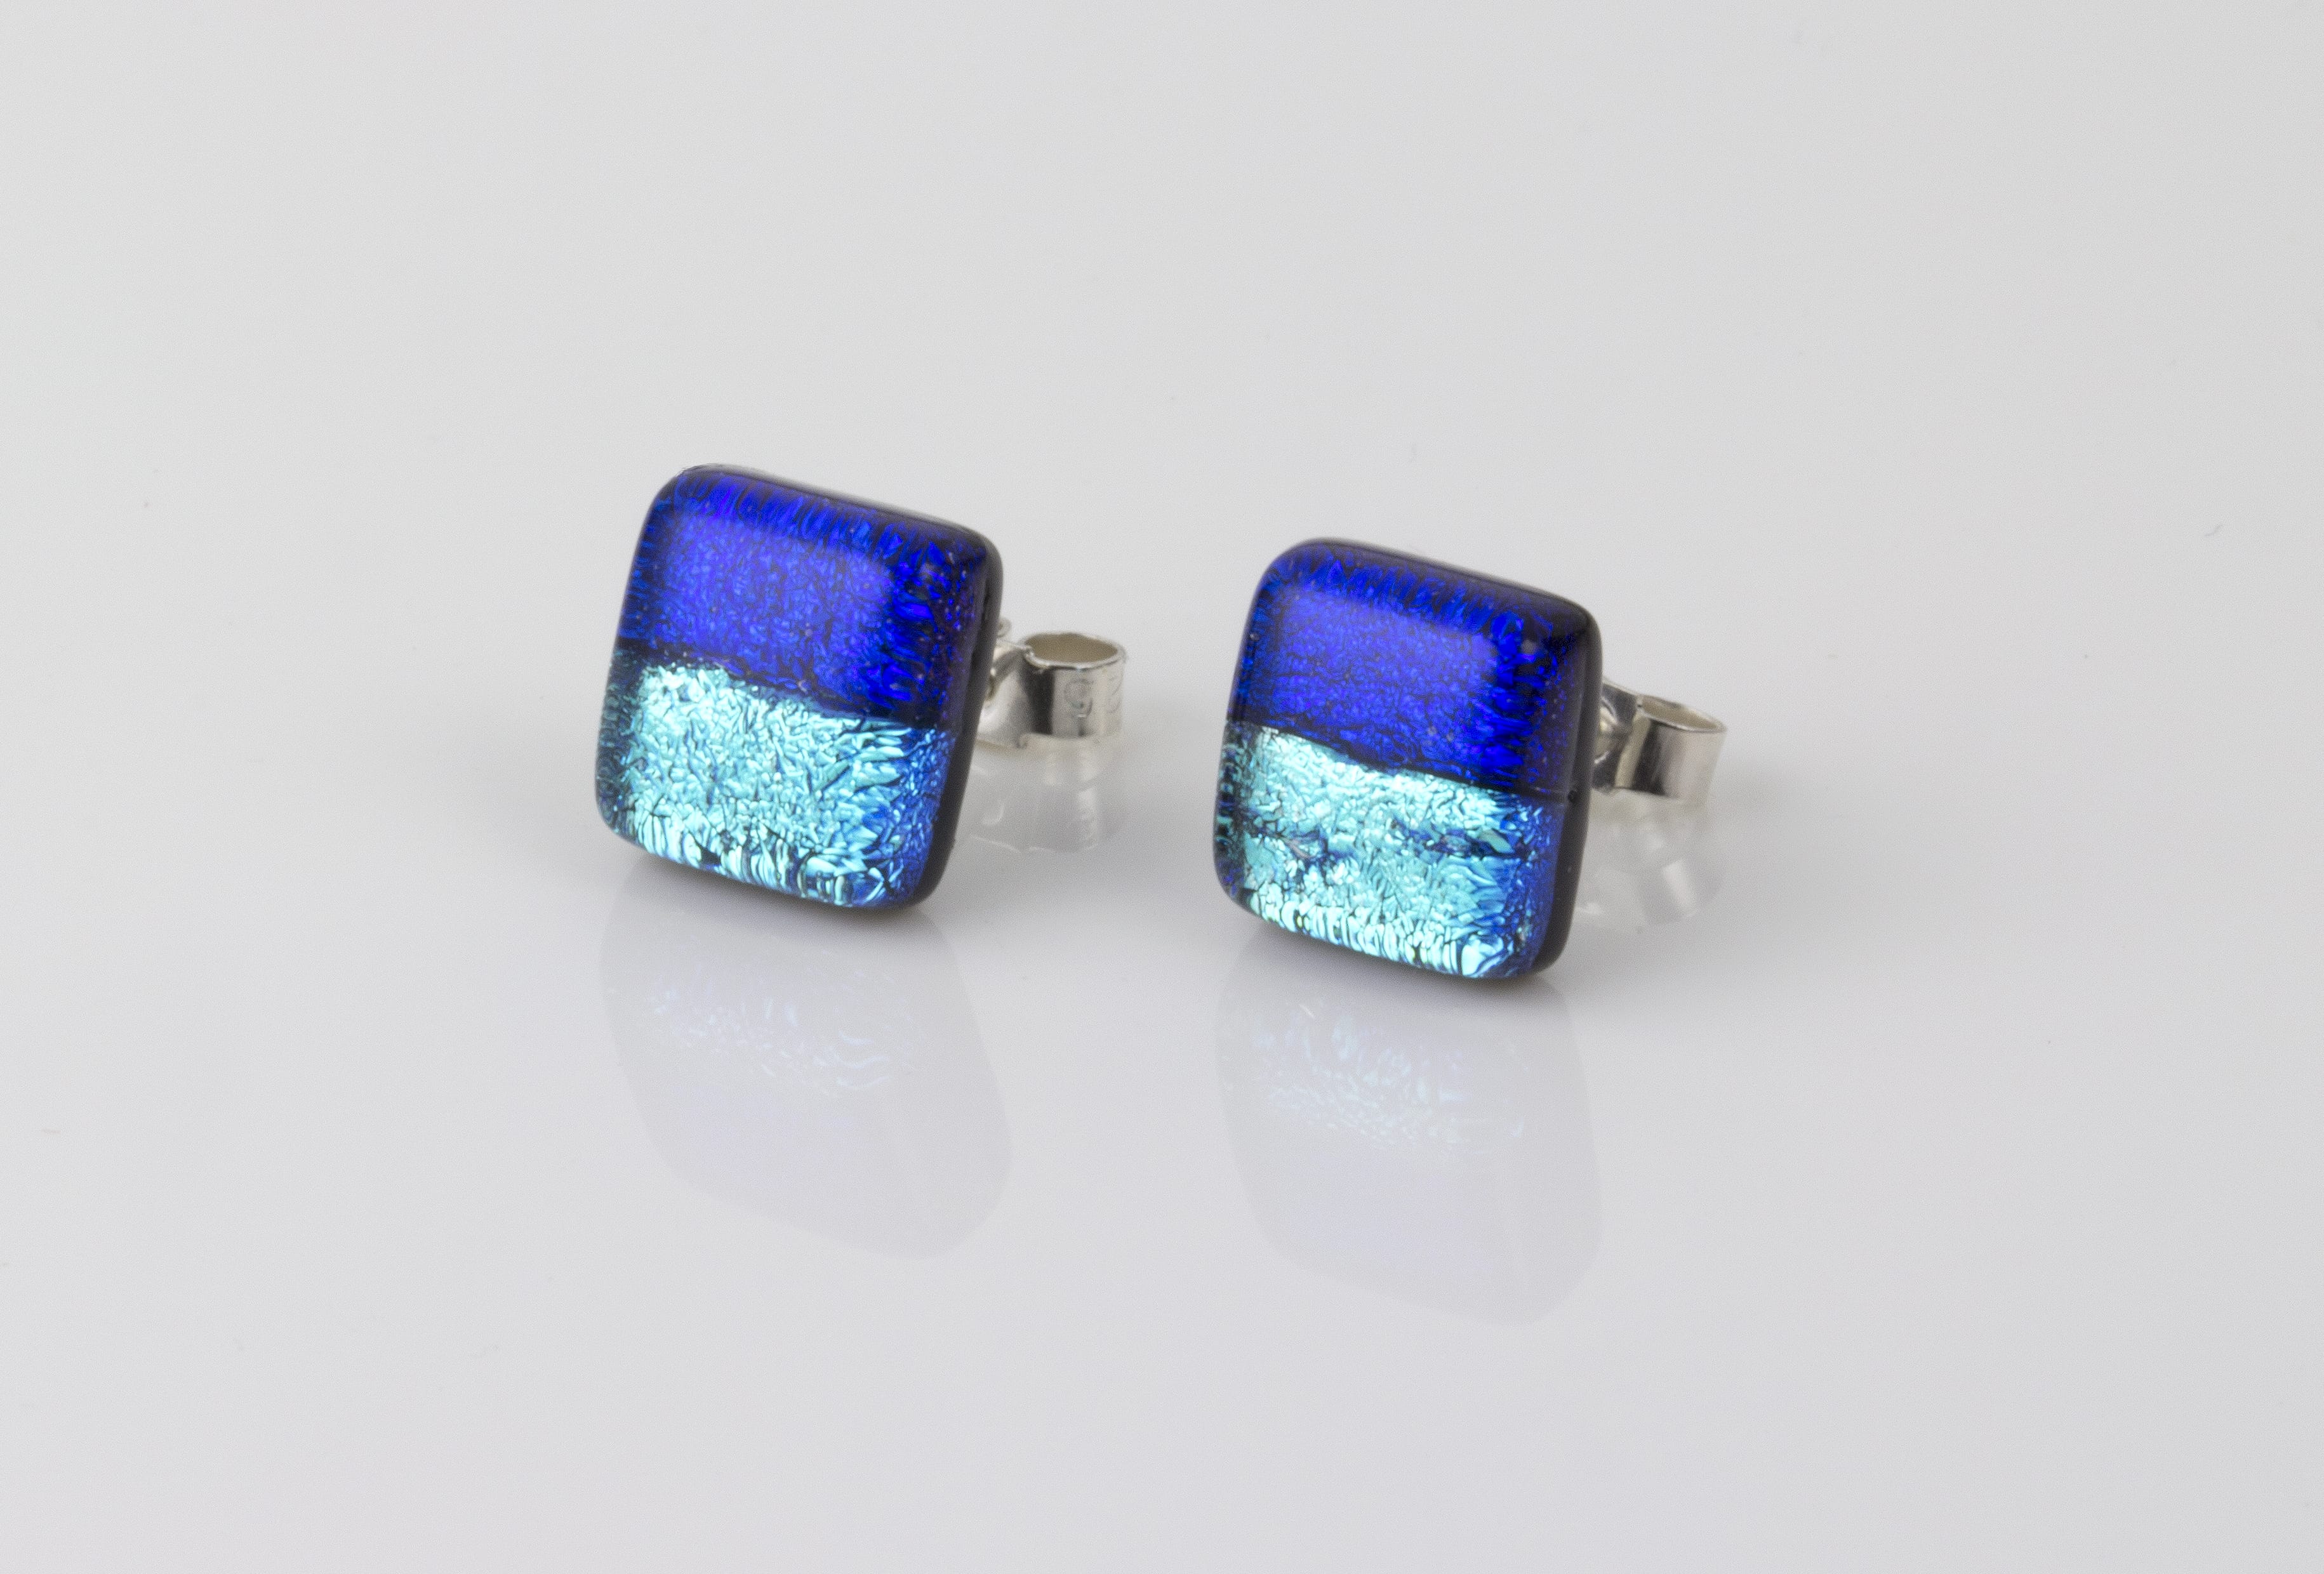 Dichroic glass jewellery uk, Handmade Stud Earrings 2 tone blue glass earrings with sterling silver posts, square, glass 8-10mm